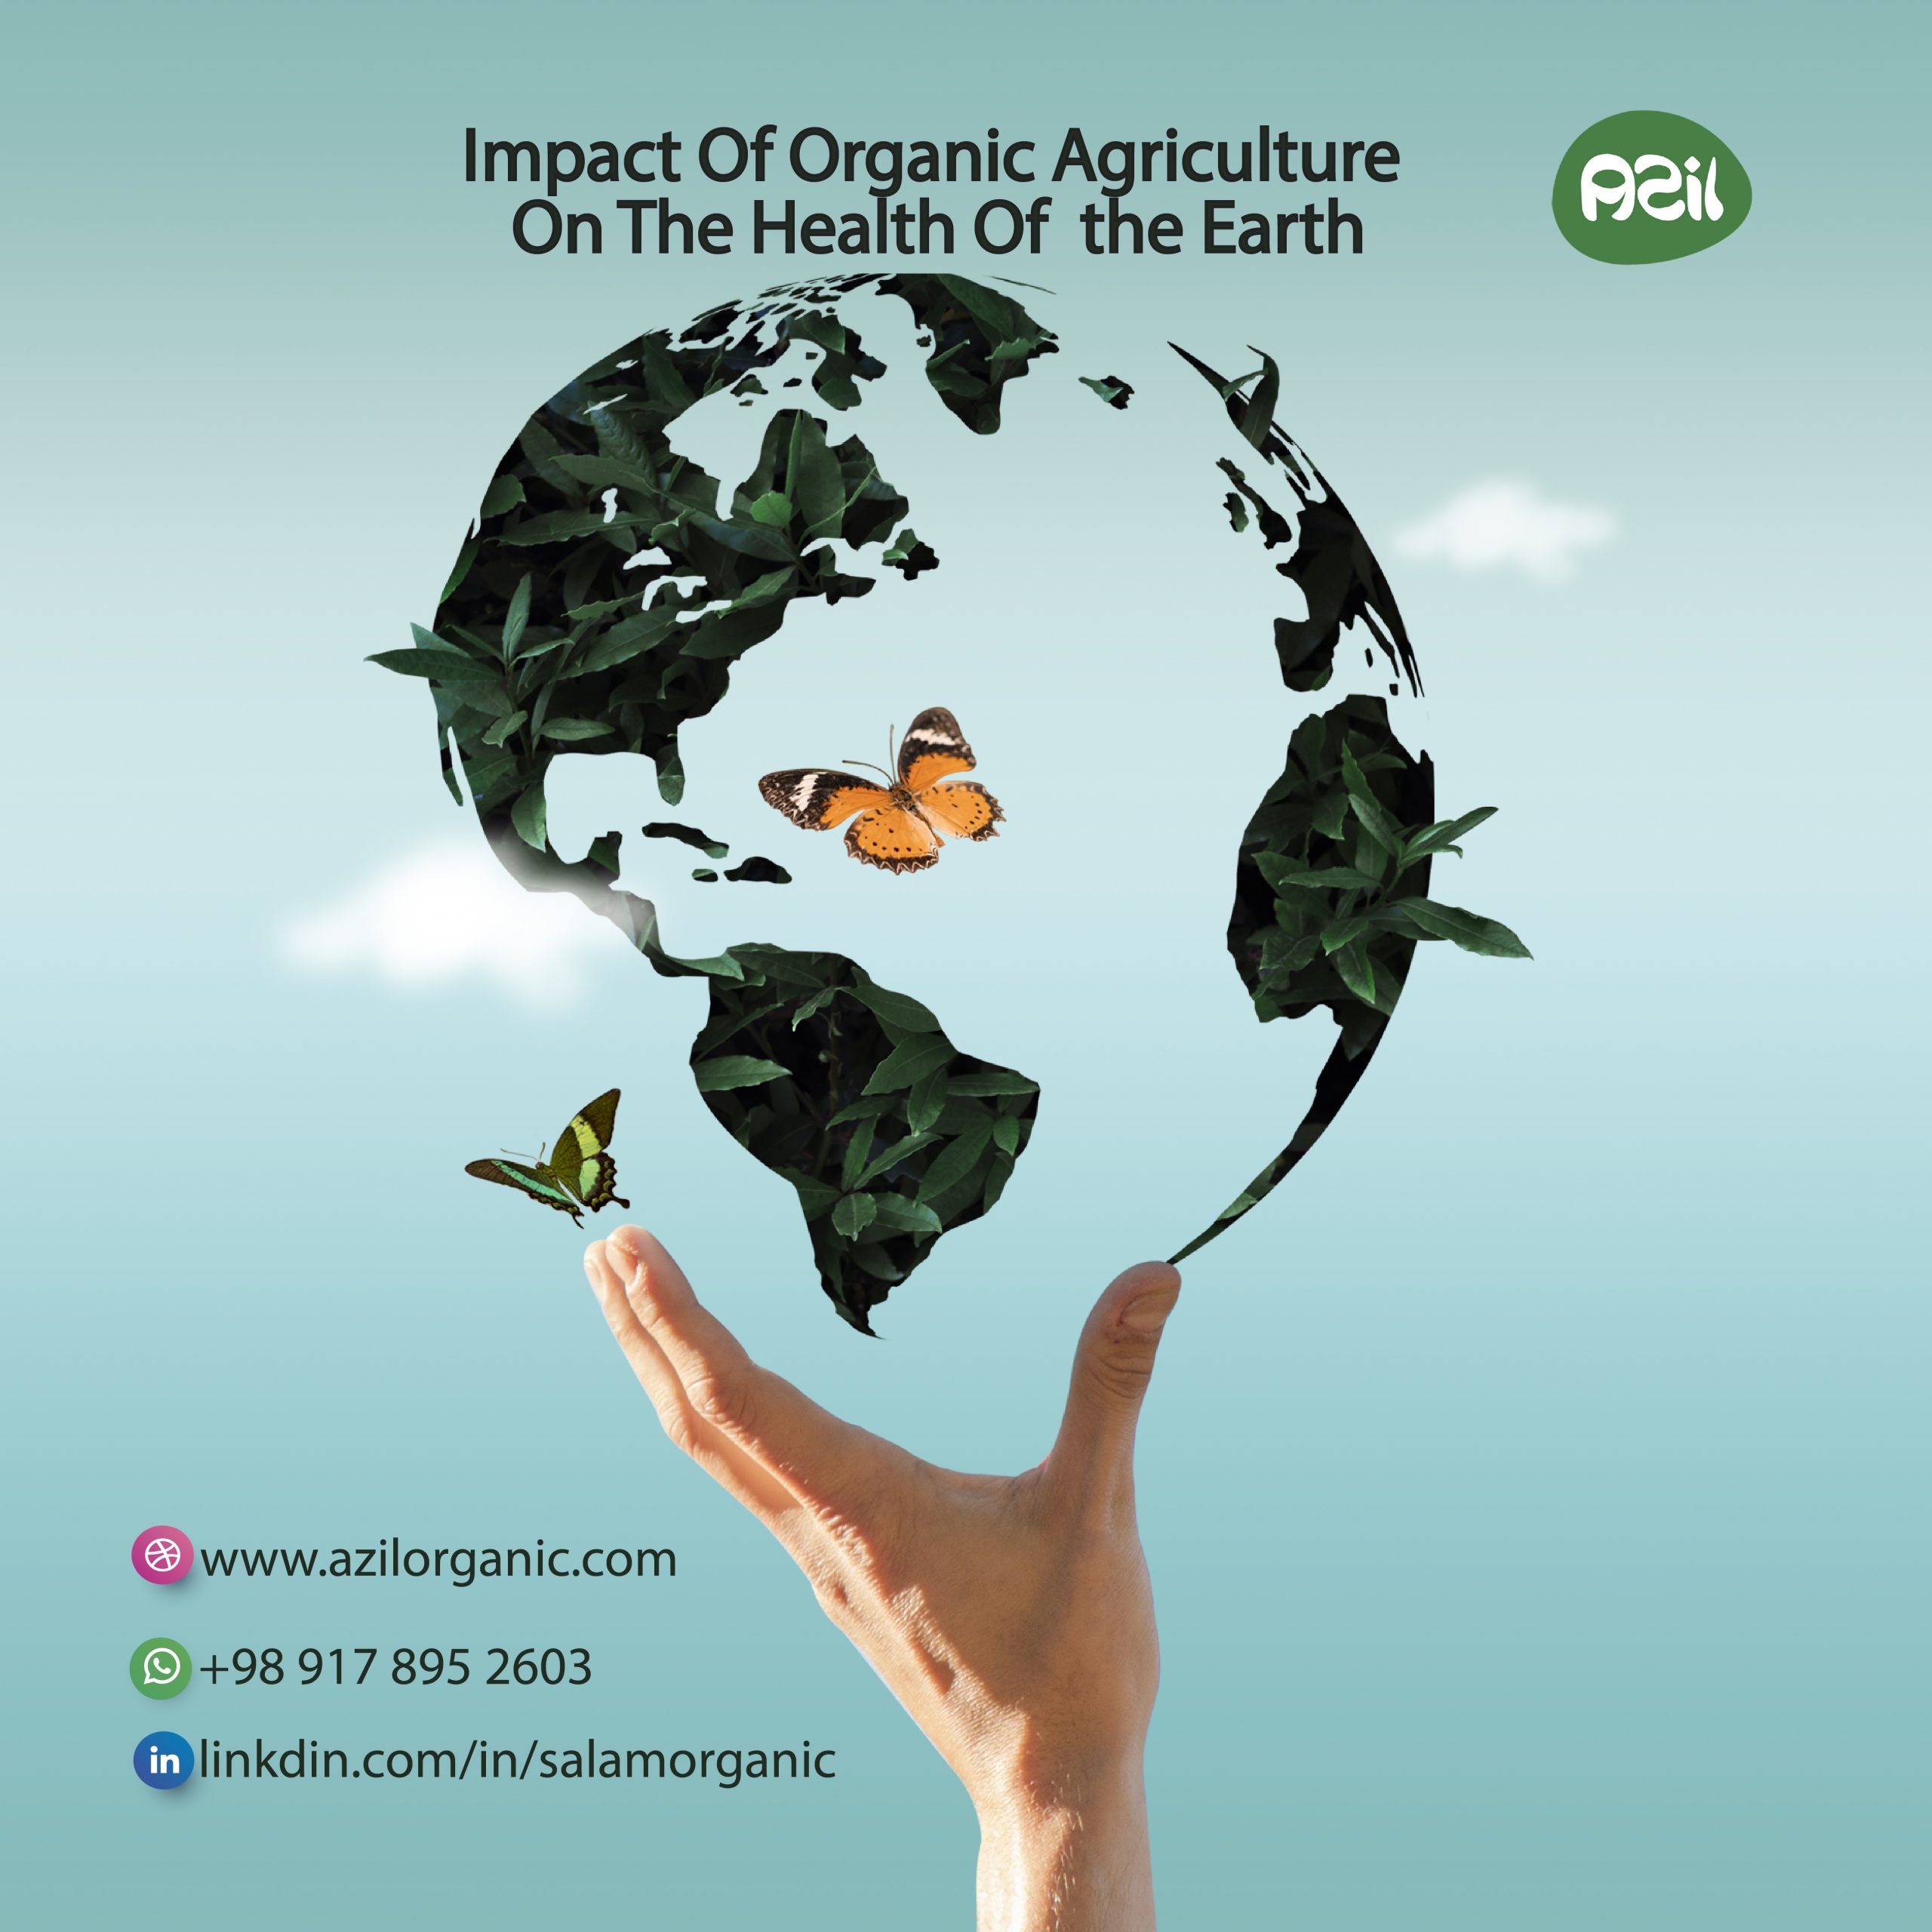 poster site final۱ scaled - The impact of organic agriculture on the health of the earth